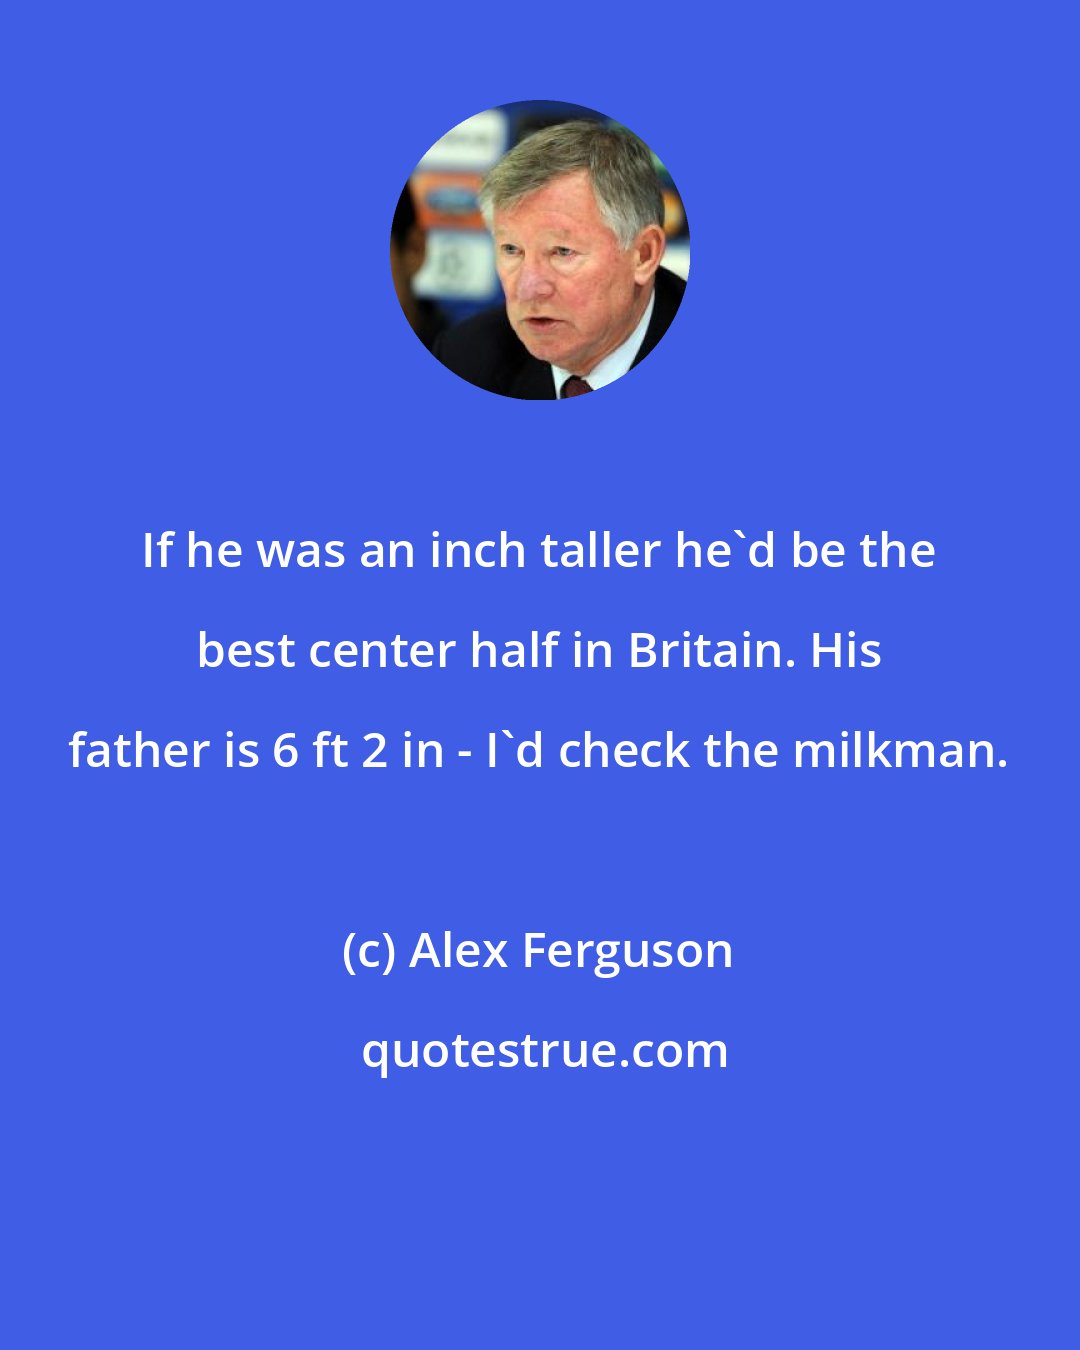 Alex Ferguson: If he was an inch taller he'd be the best center half in Britain. His father is 6 ft 2 in - I'd check the milkman.